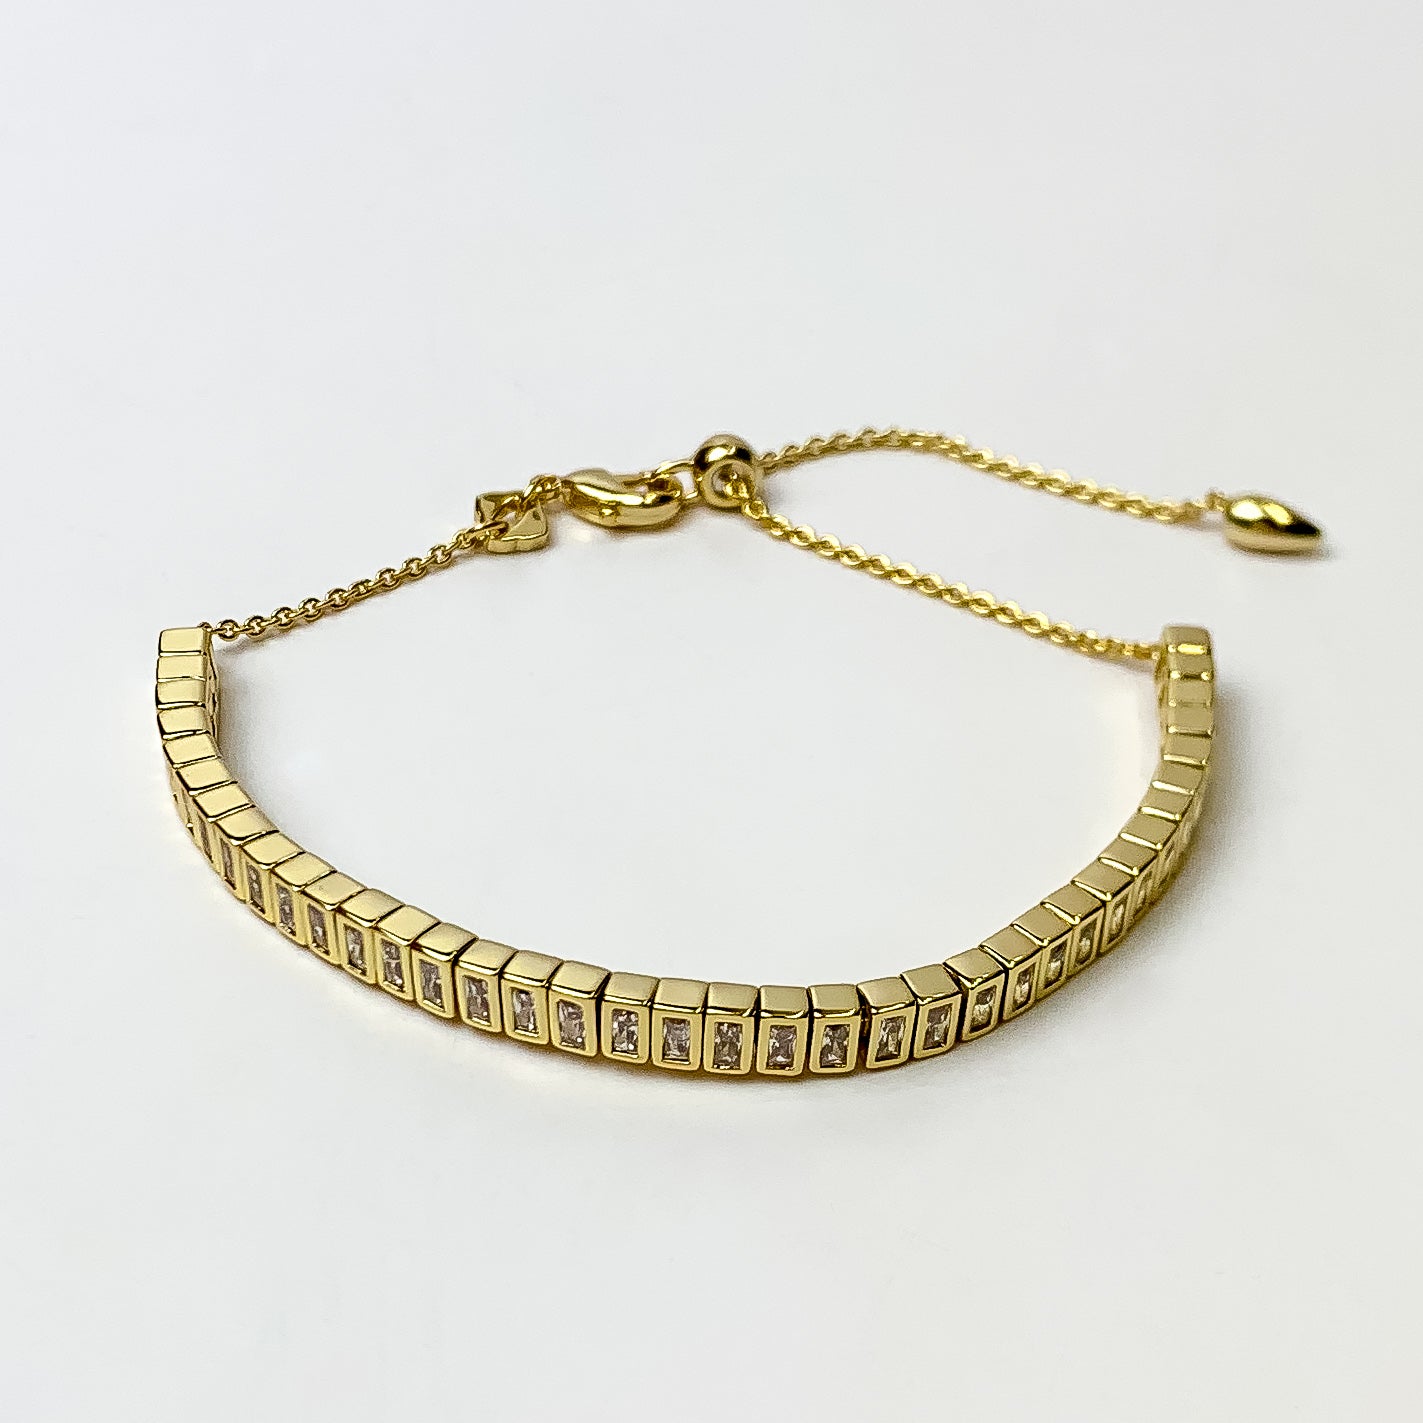 This Gracie Gold Tennis Delicate Chain Bracelet in White by Kendra Scott is pictured on a white background.